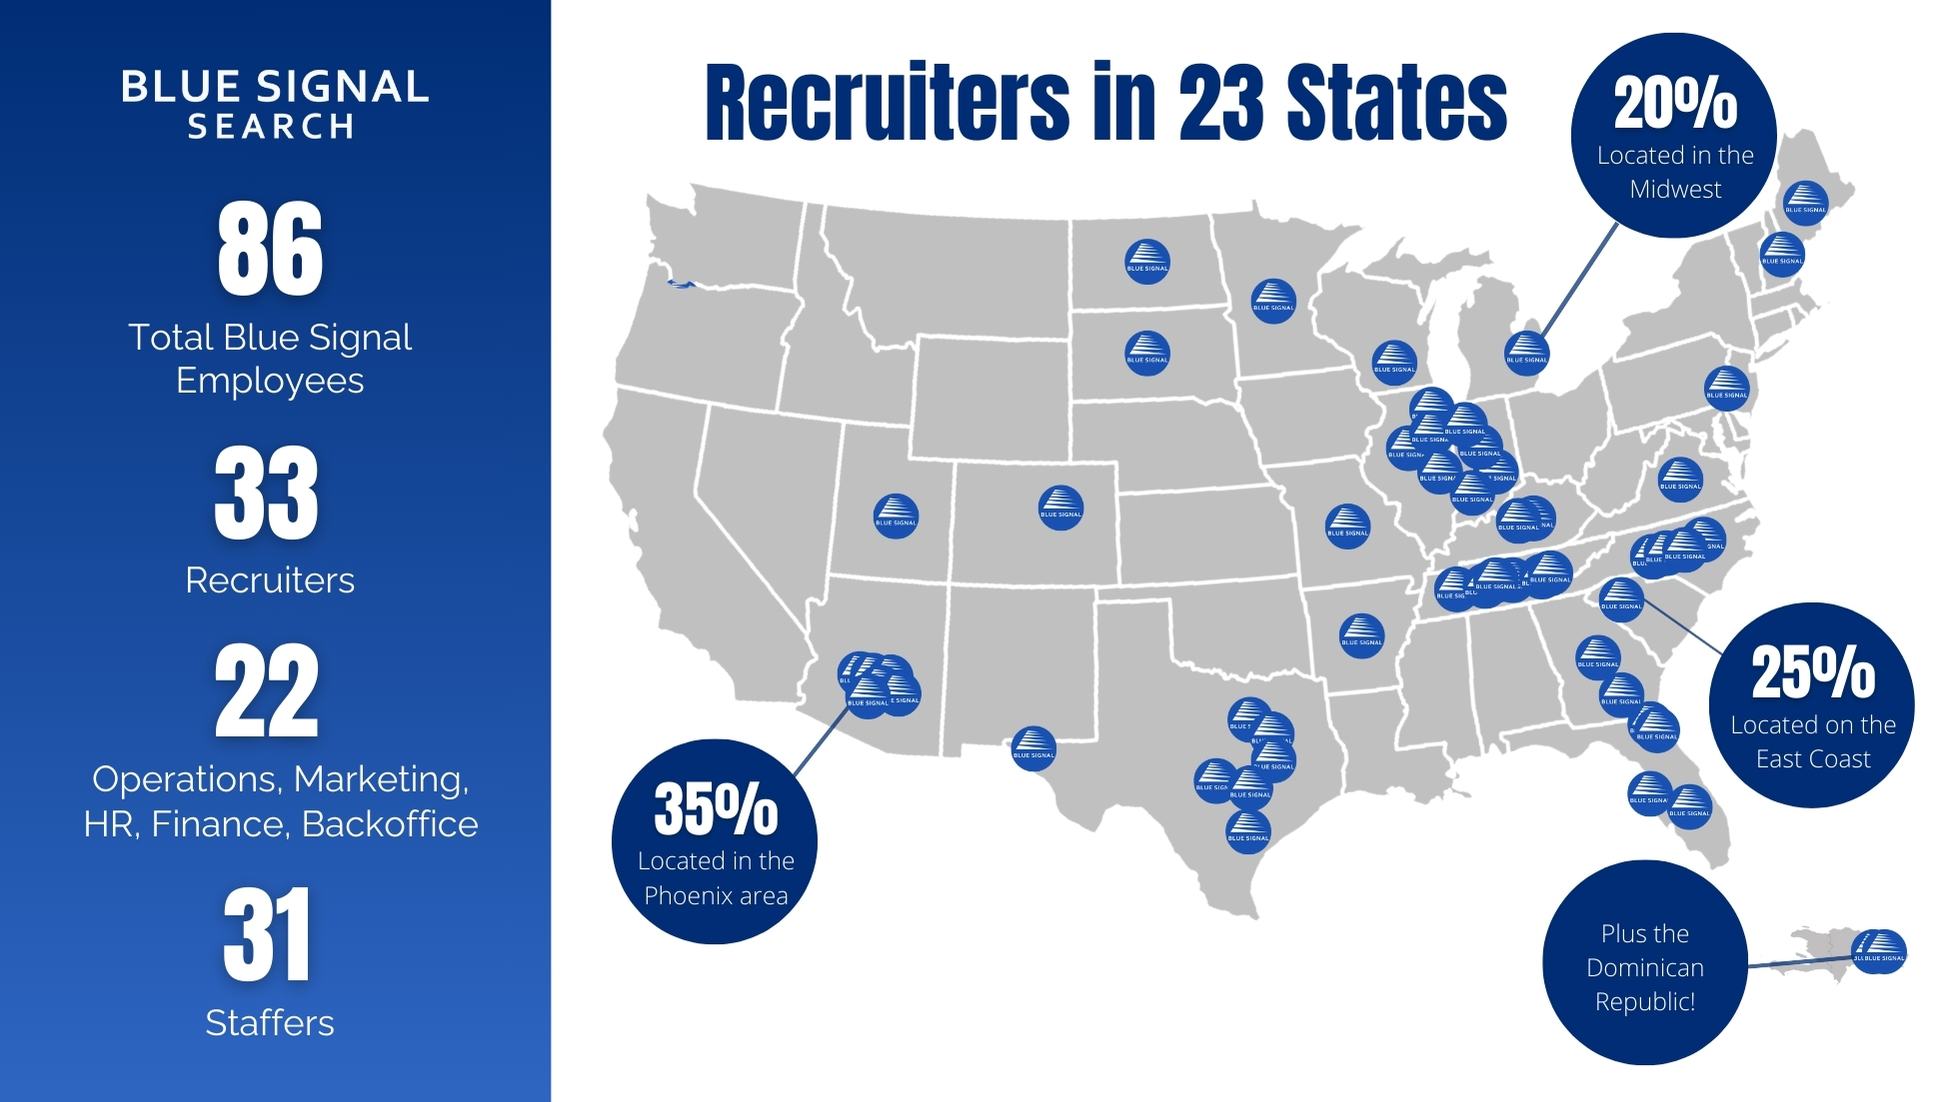 Map of the United States showing the spread of Blue Signal's recruiters across 23 states, indicating the company's nationwide reach.